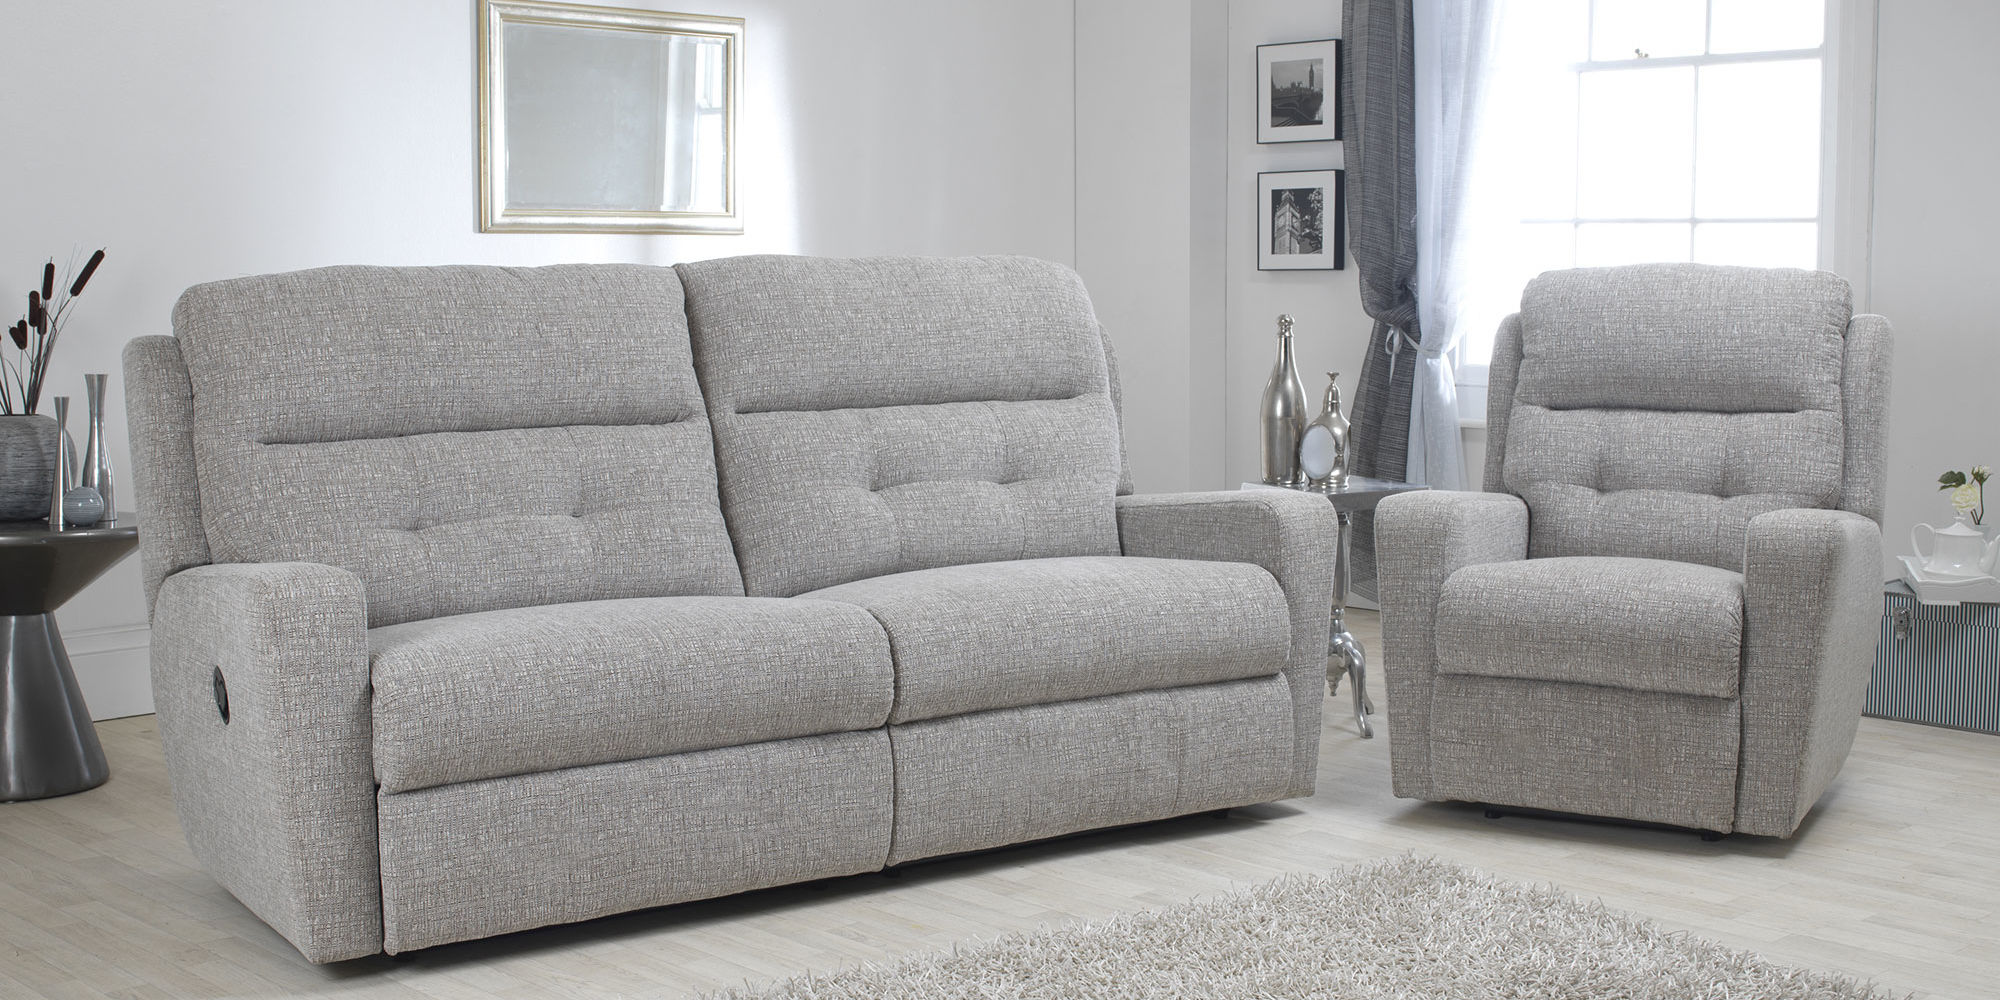 Furnico Sofas and Chairs in Cornwall from Solomons Furniture